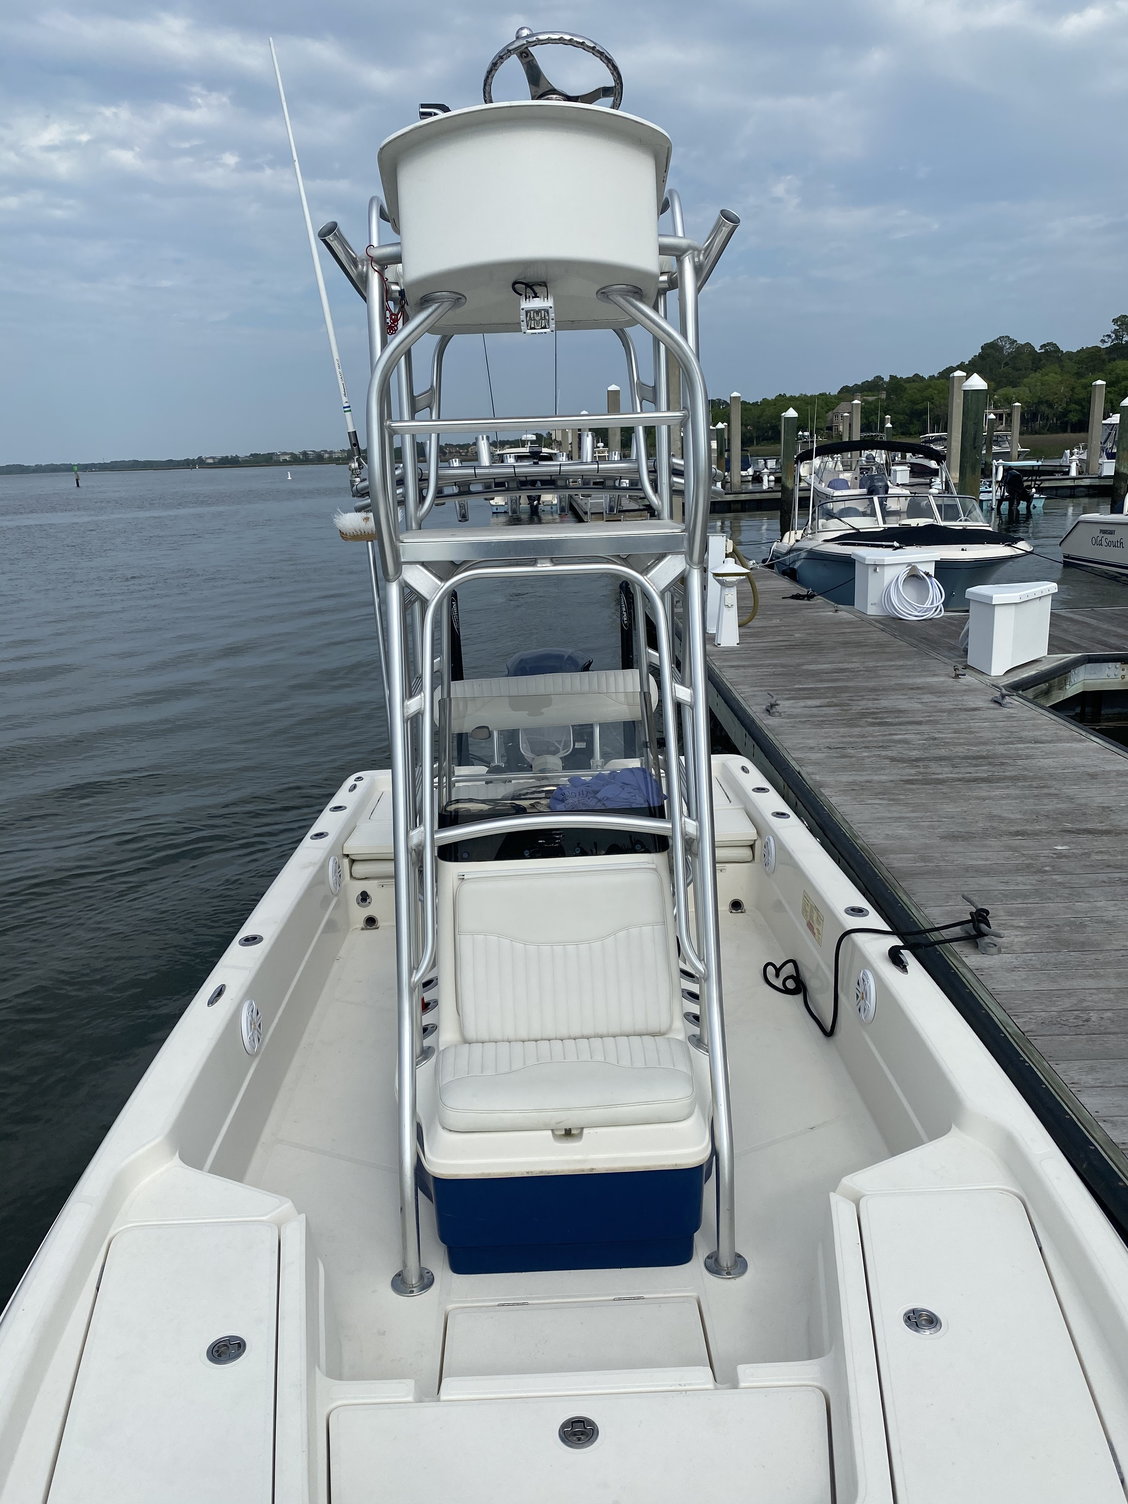 Skeeter sx240 (Tower boat) for sale - The Hull Truth - Boating and Fishing  Forum